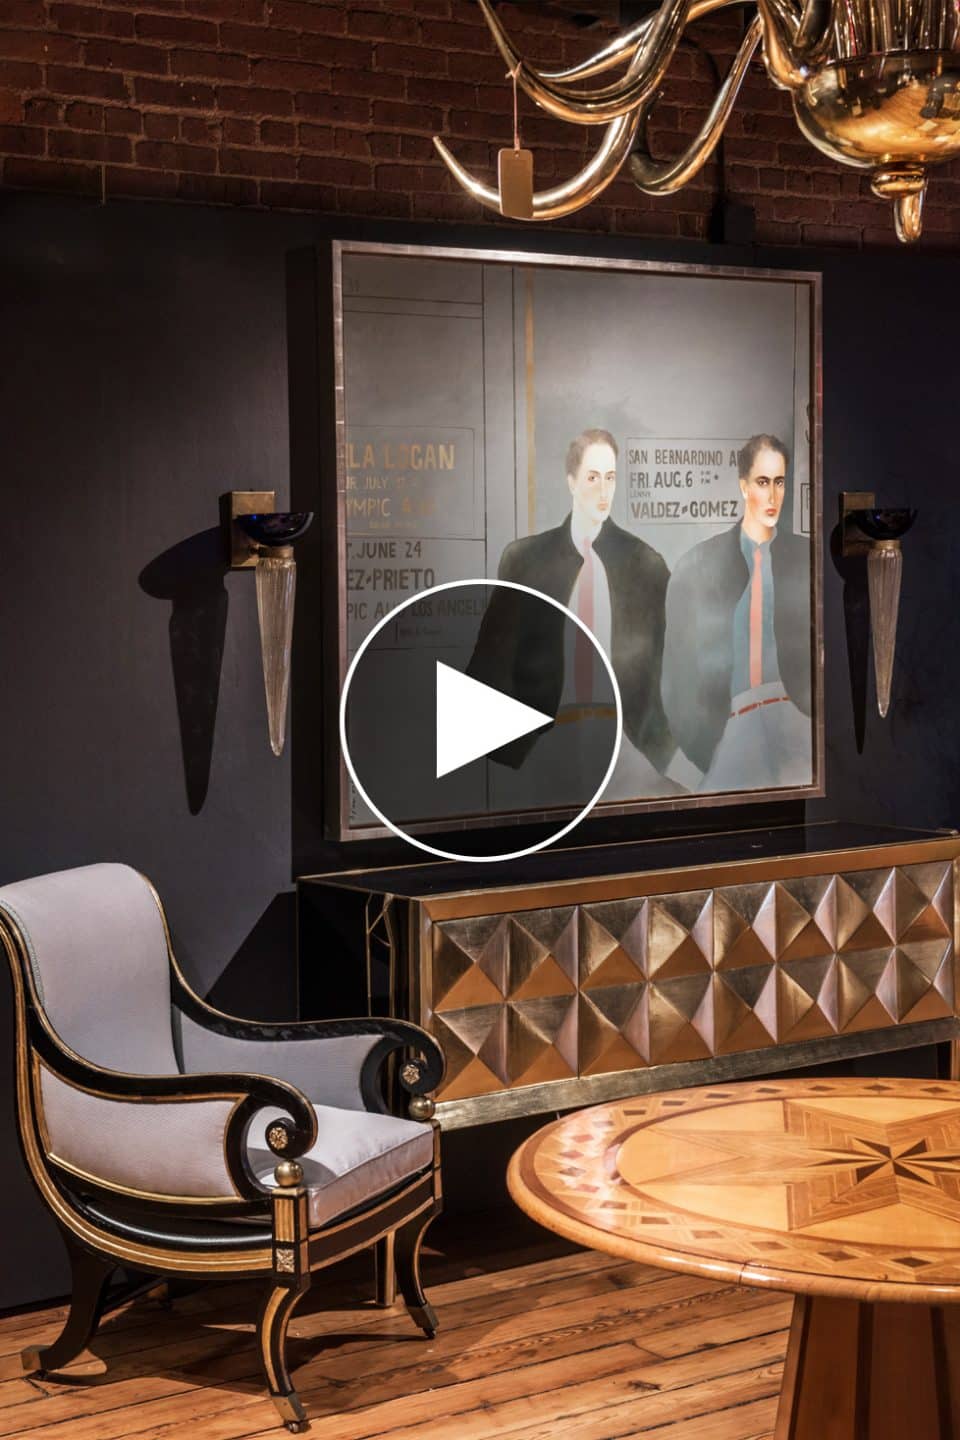 Video: Insiders Share What Makes the 1stdibs Gallery Special